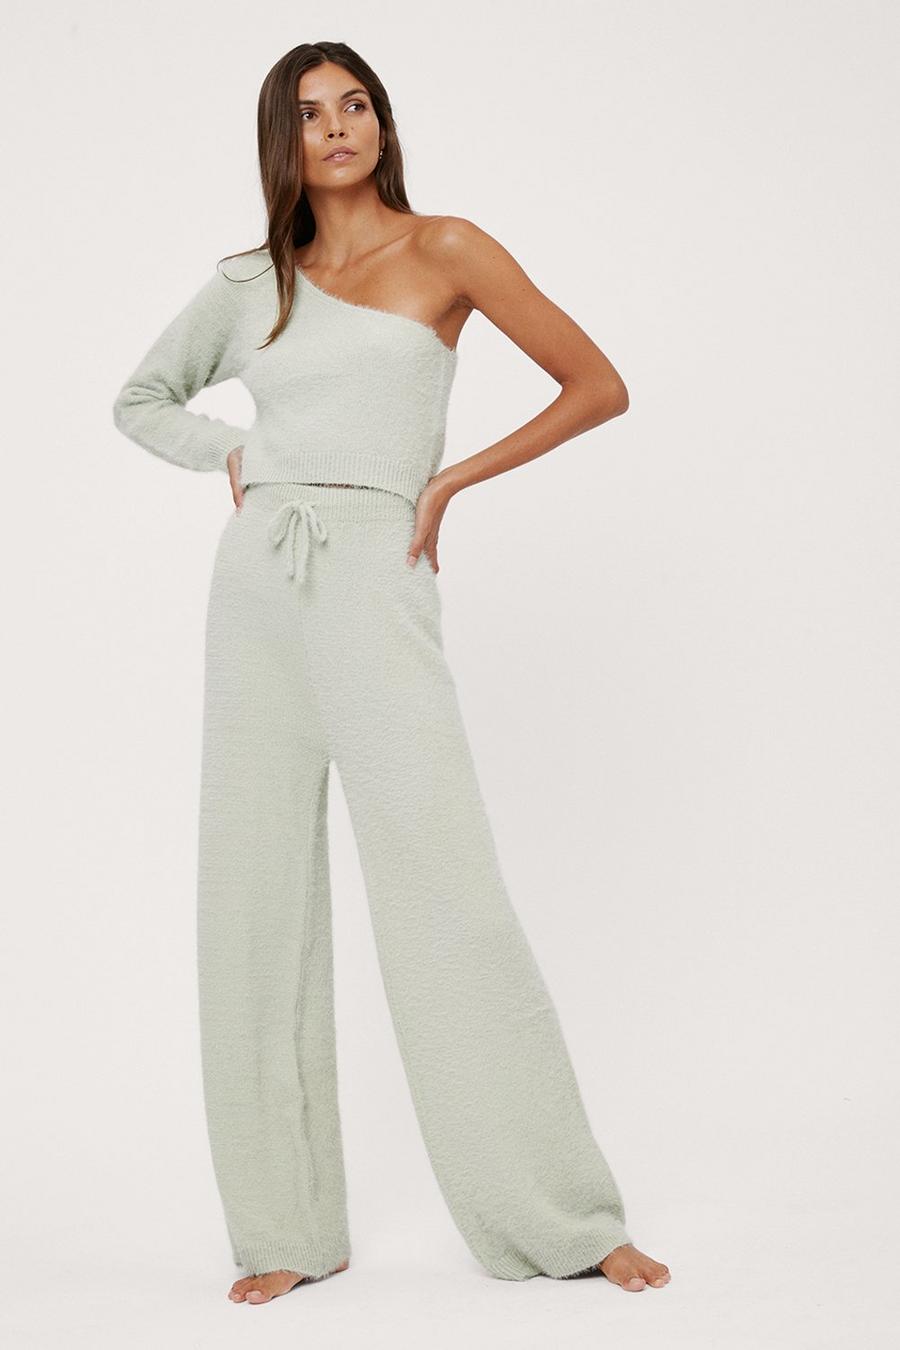 Fluffy One Sleeve Top and Pants Lounge Set